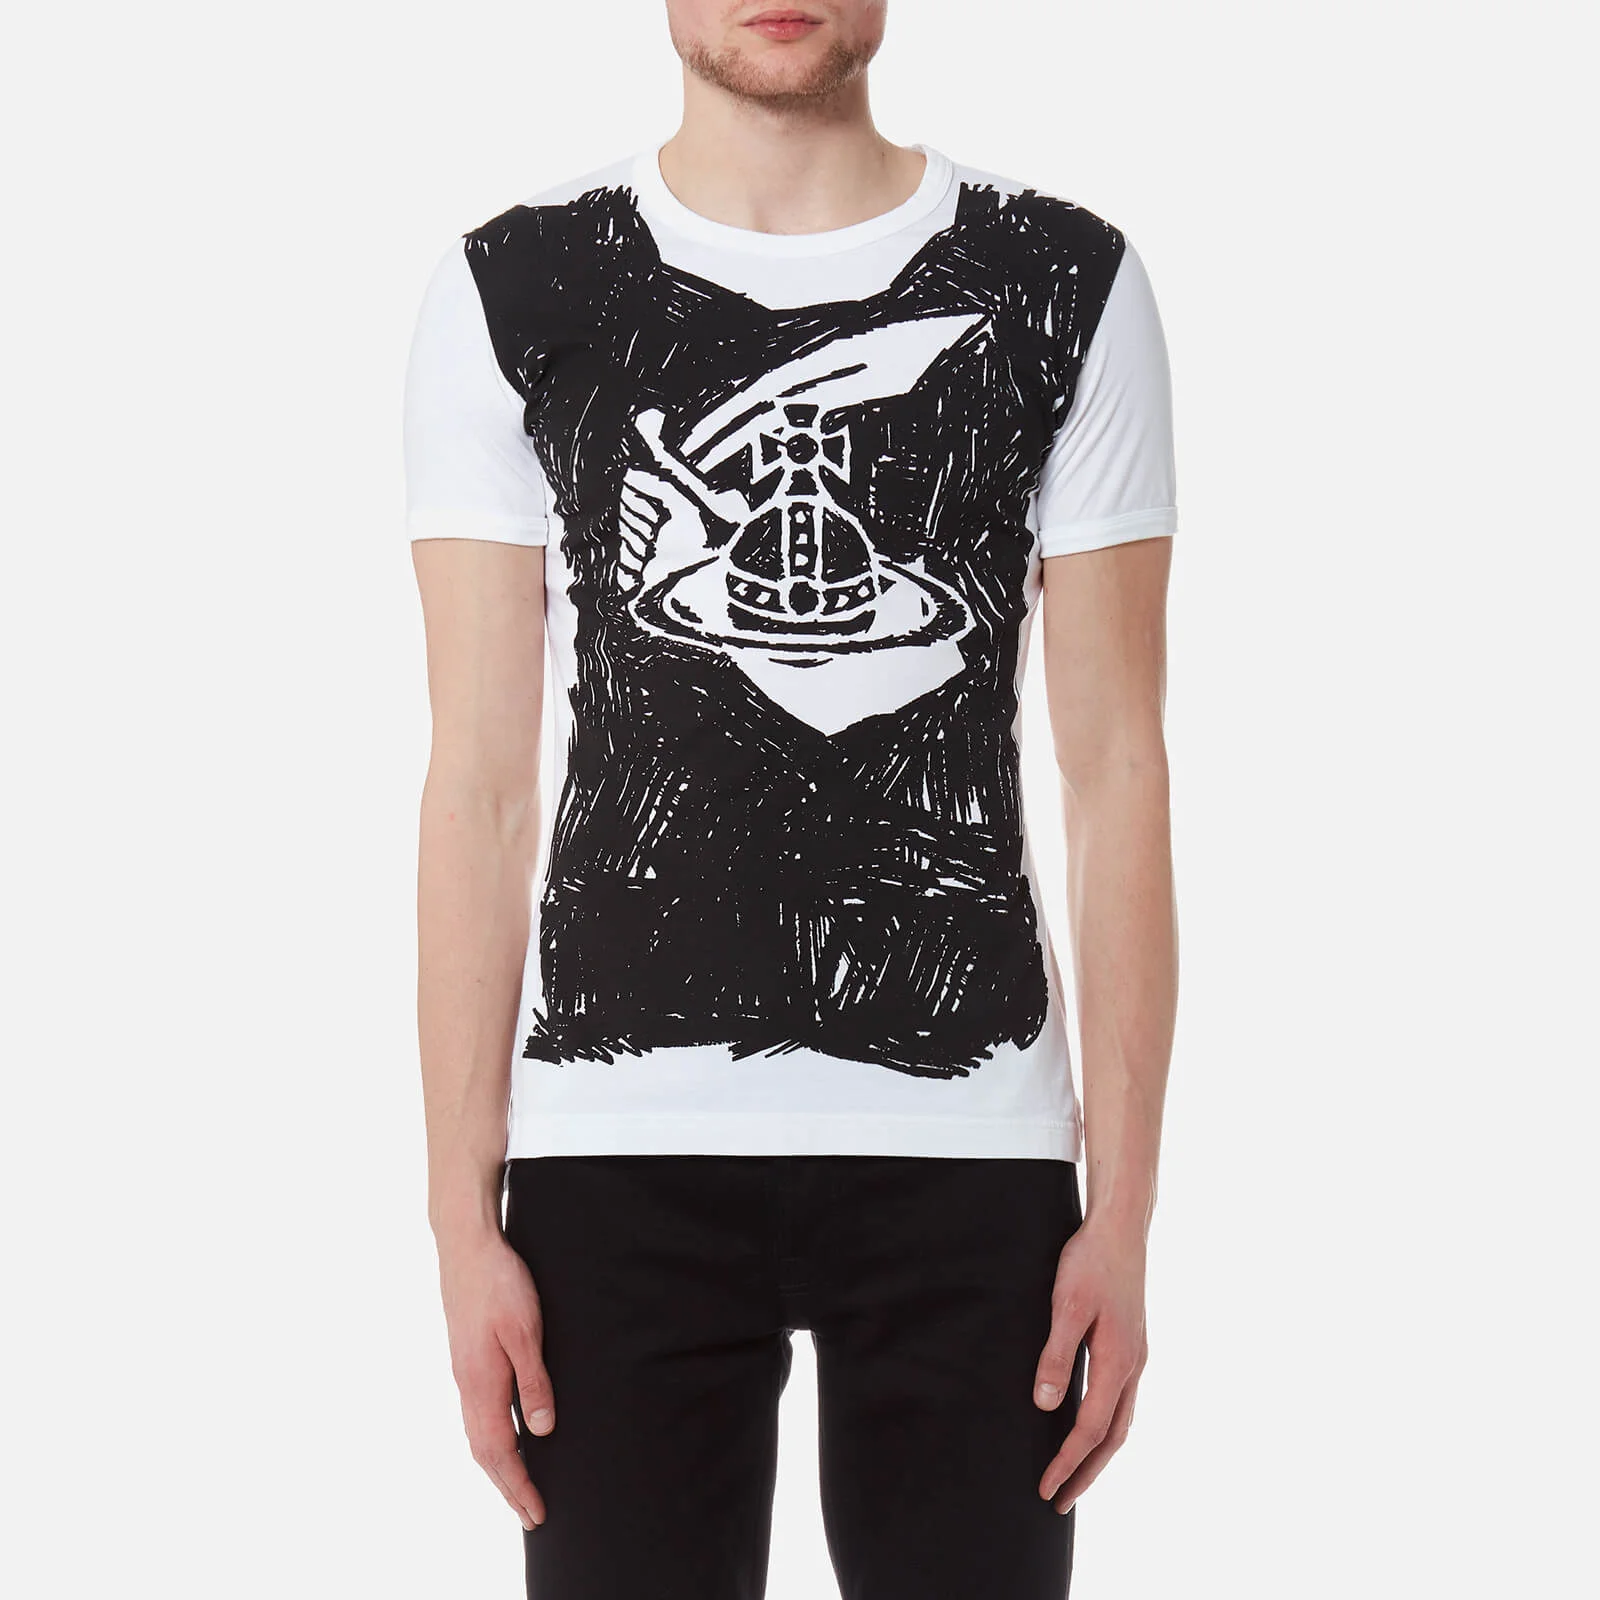 Vivienne Westwood Anglomania Men's Classic Scribble T-Shirt - White Image 1